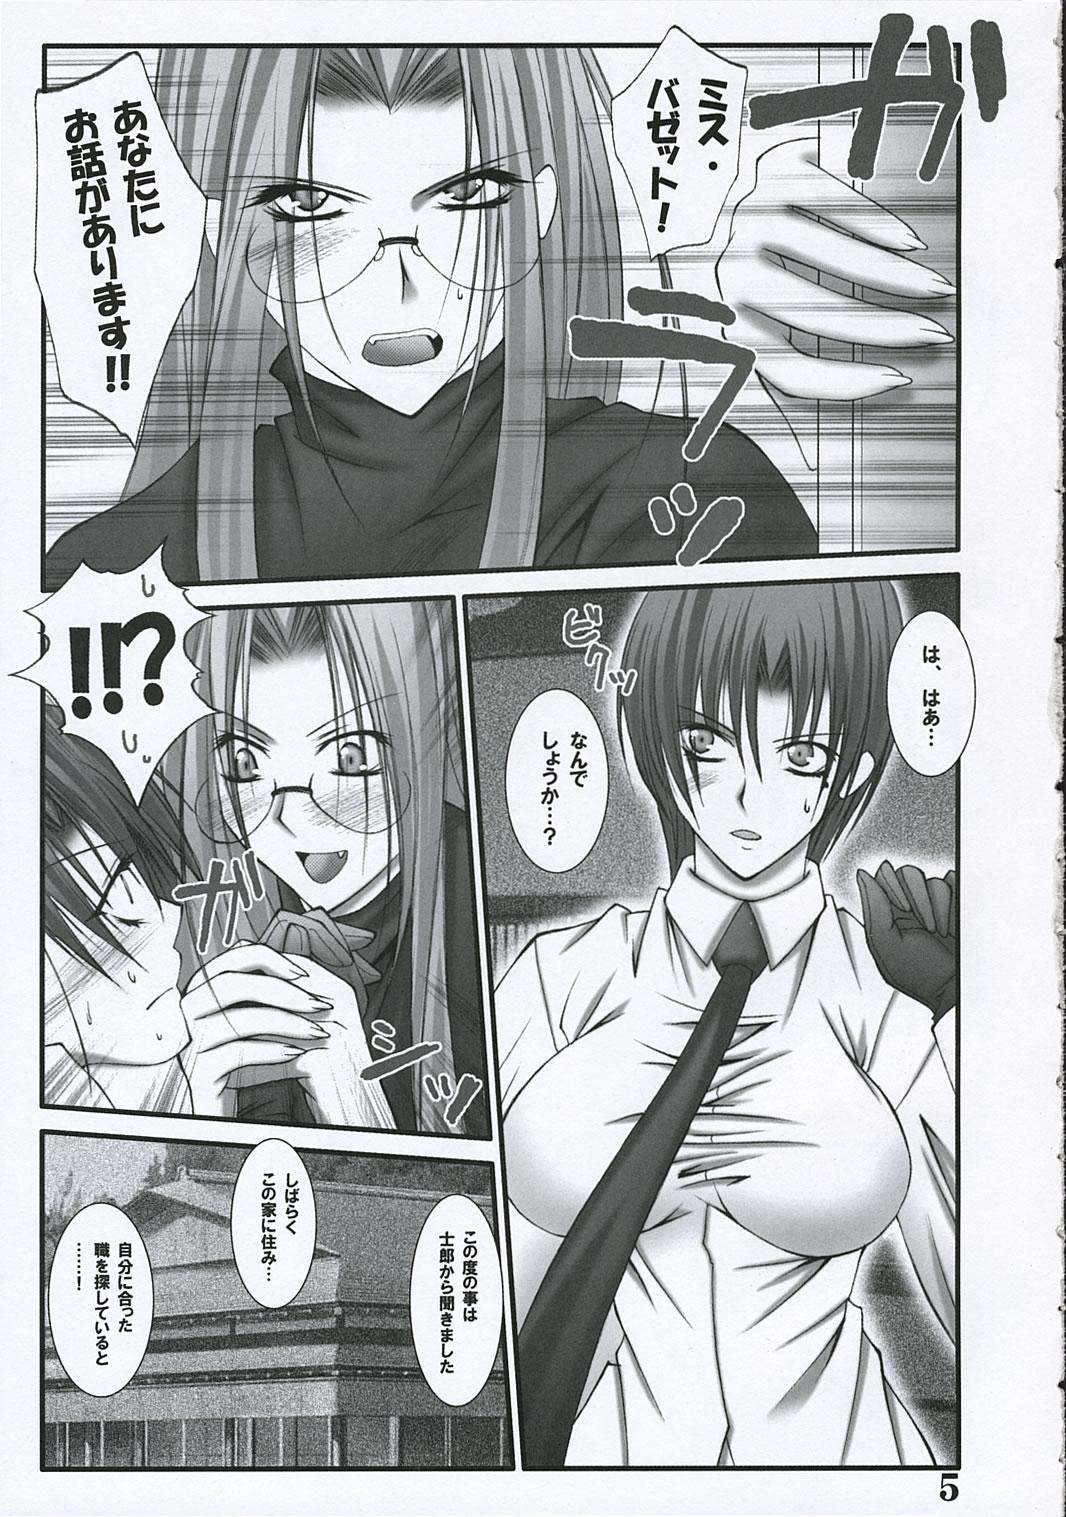 Solo Female SEVENTH HEAVENS - Fate hollow ataraxia Tinytits - Page 4